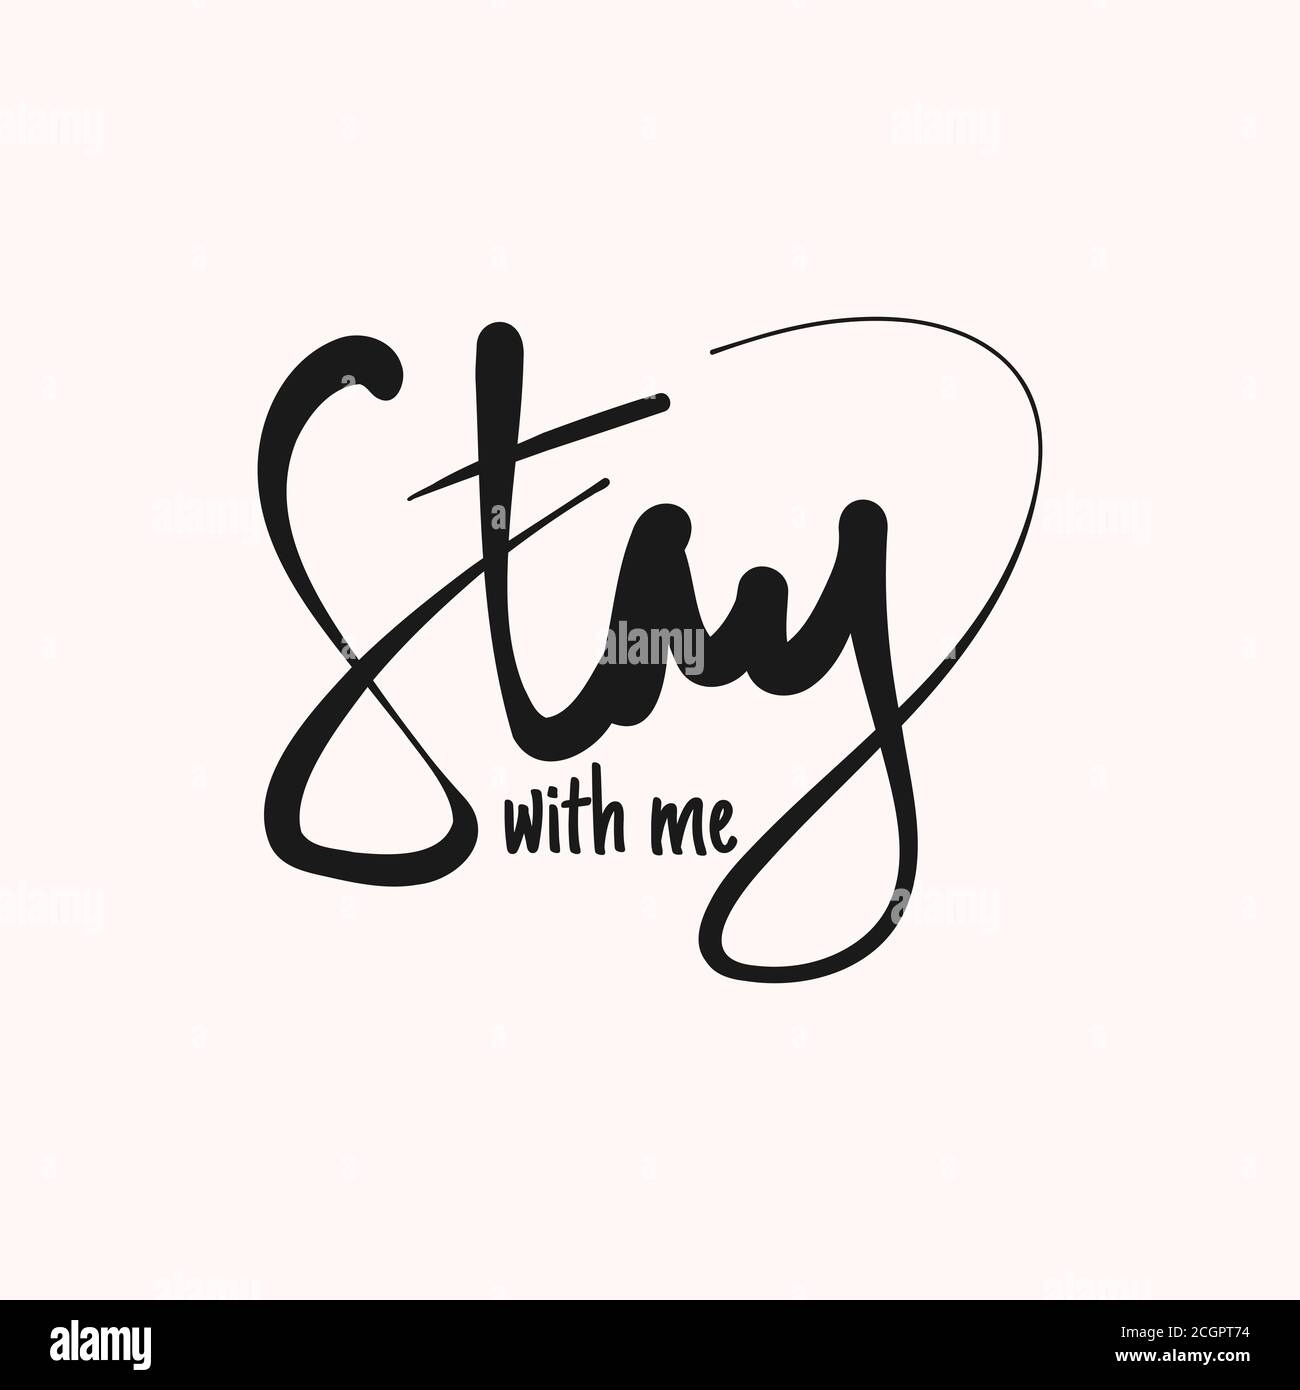 Stay With Me Quote About Romantic Love In Doodle Art Vector